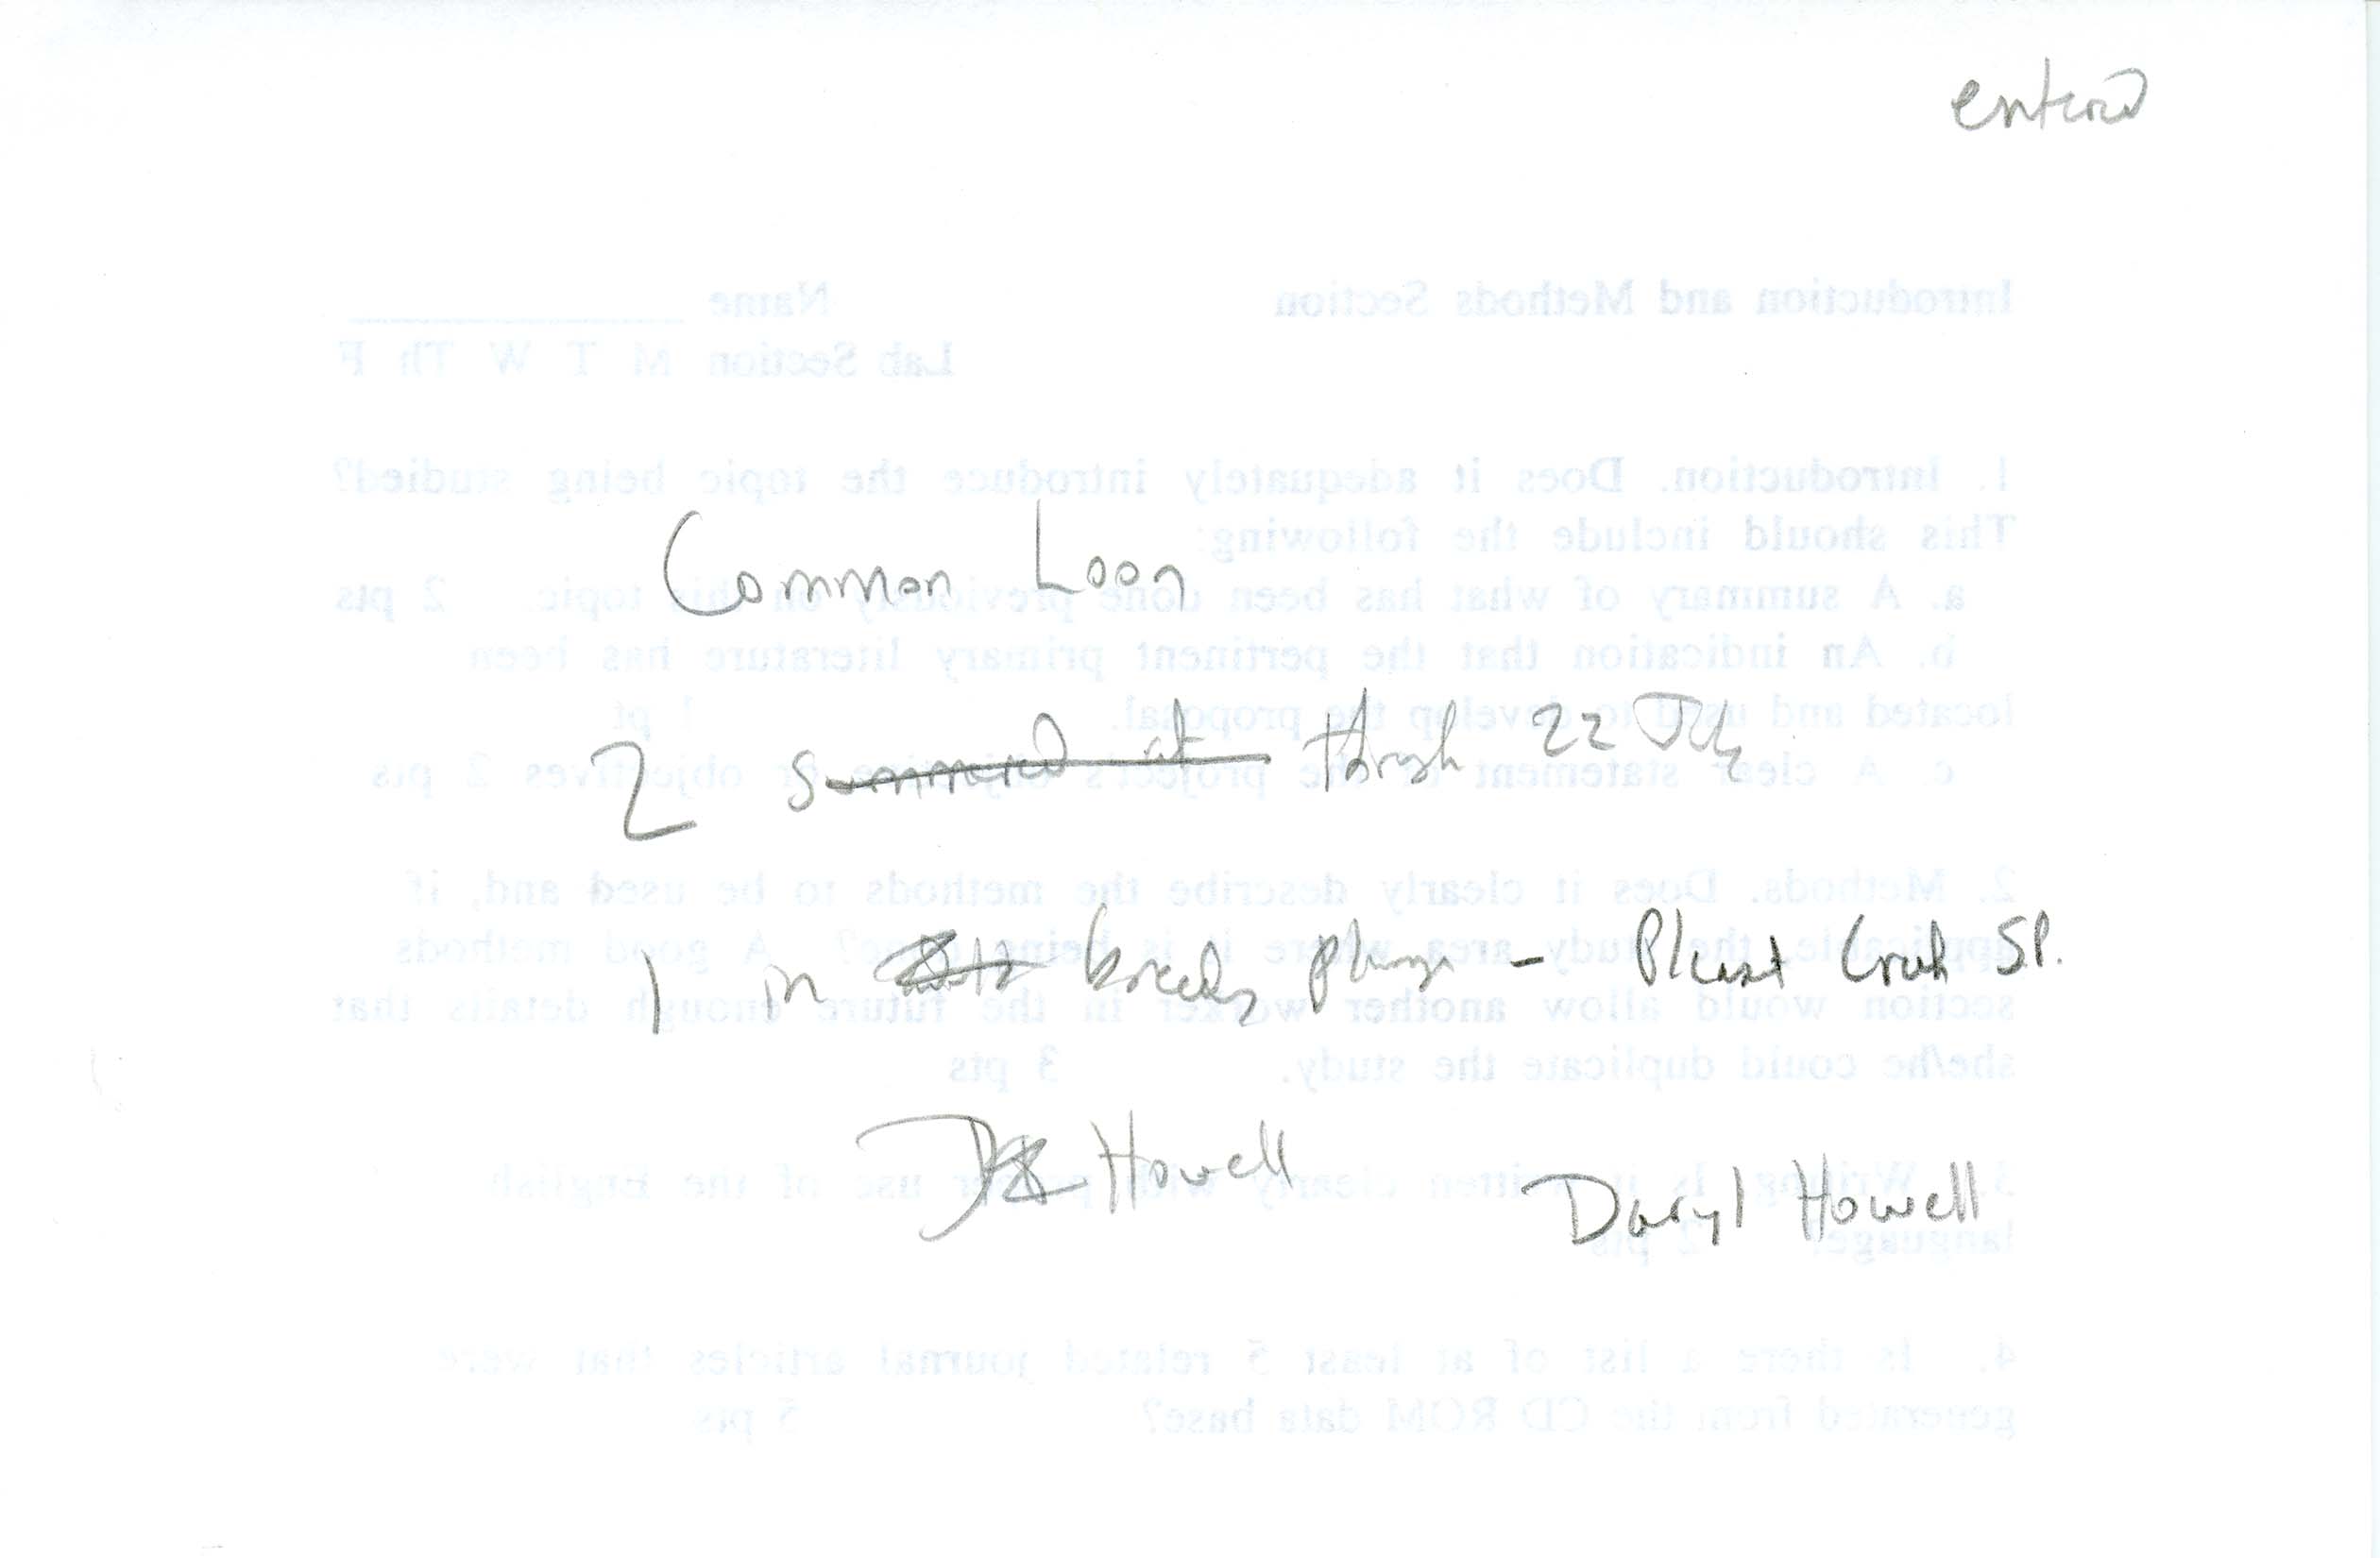 Field notes contributed by Daryl Howell, summer 1996